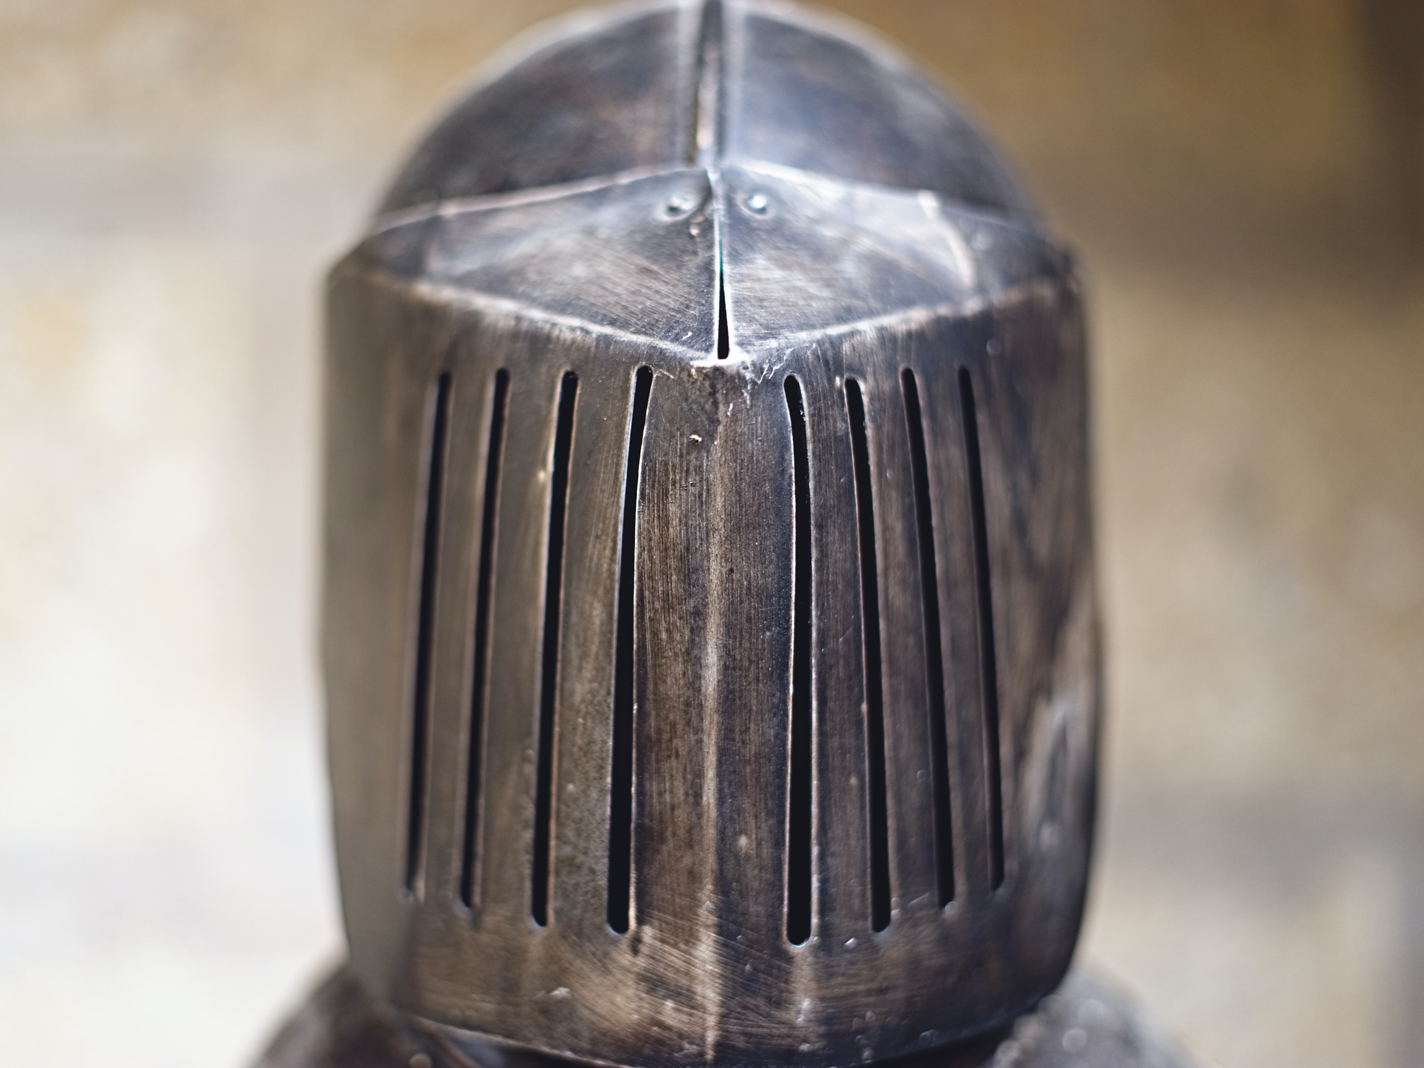 An image of a knight's helmet. Photo by Simon Maage on Unsplash